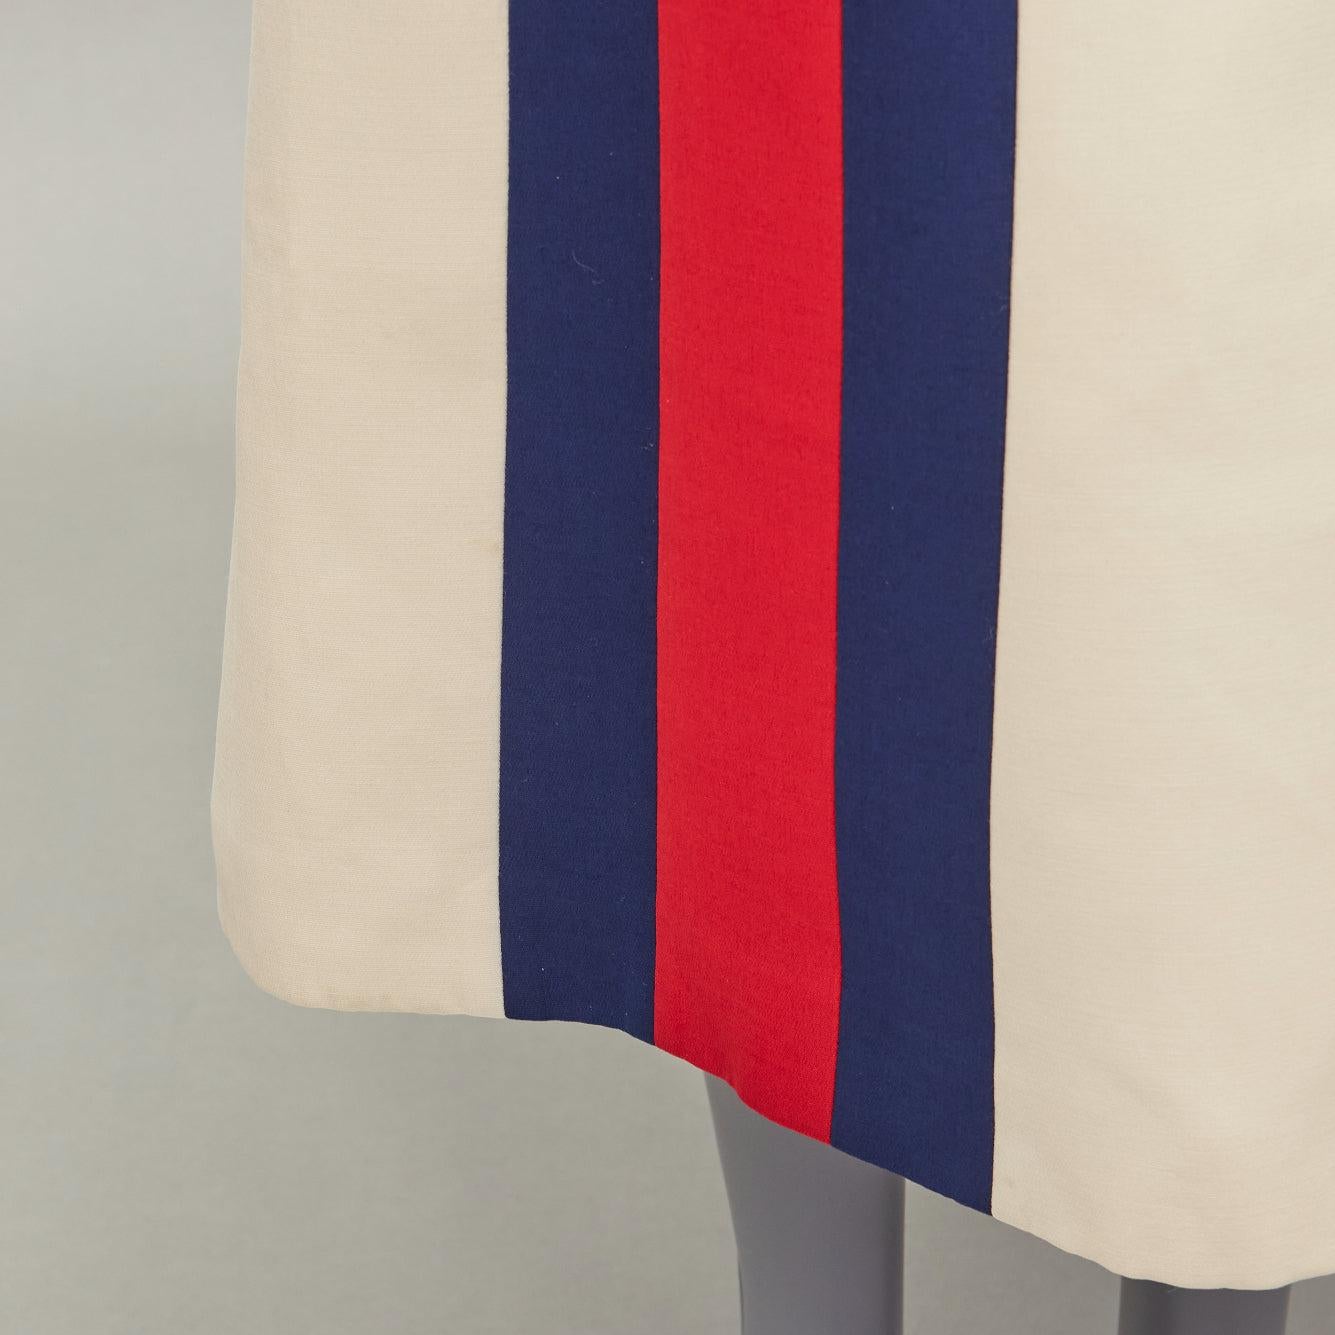 GUCCI blue red web trim front beige textured Aline midi skirt
Reference: VACN/A00049
Brand: Gucci
Designer: Alessandro Michele
Material: Fabric
Color: Beige, Red
Pattern: Striped
Closure: Zip
Lining: Cream Fabric
Extra Details: Side